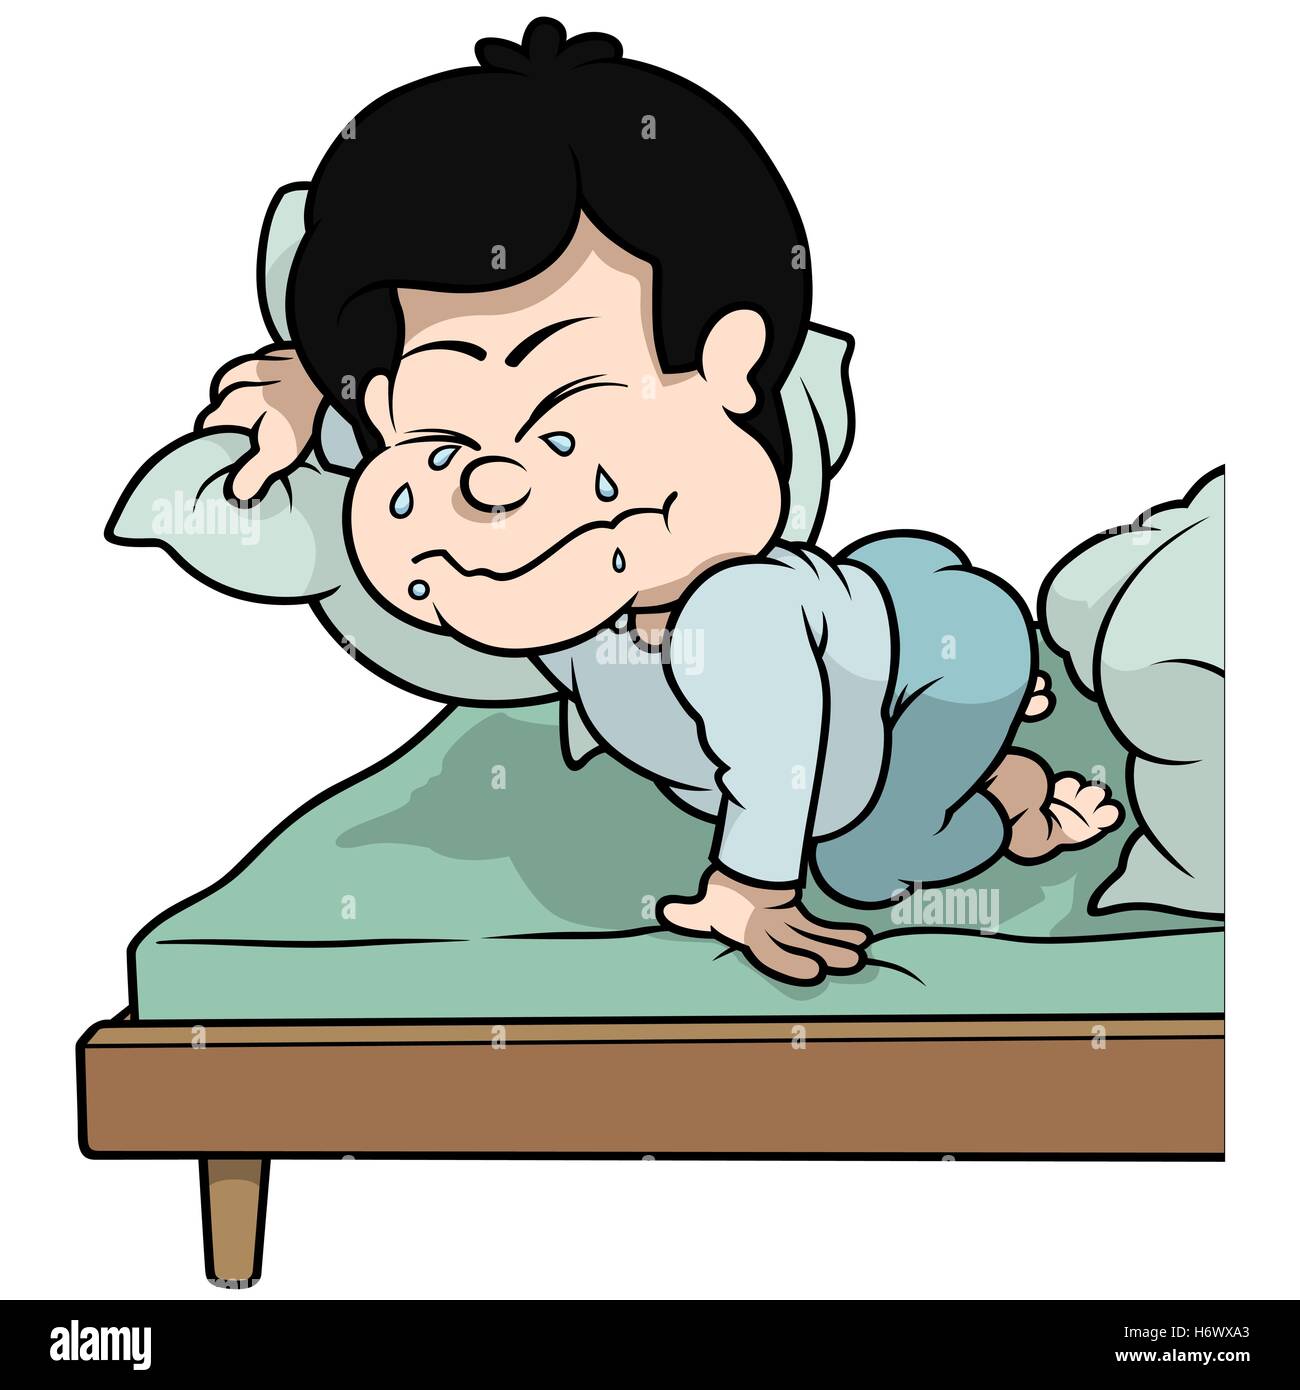 Boy Crying In Bed Stock Vector